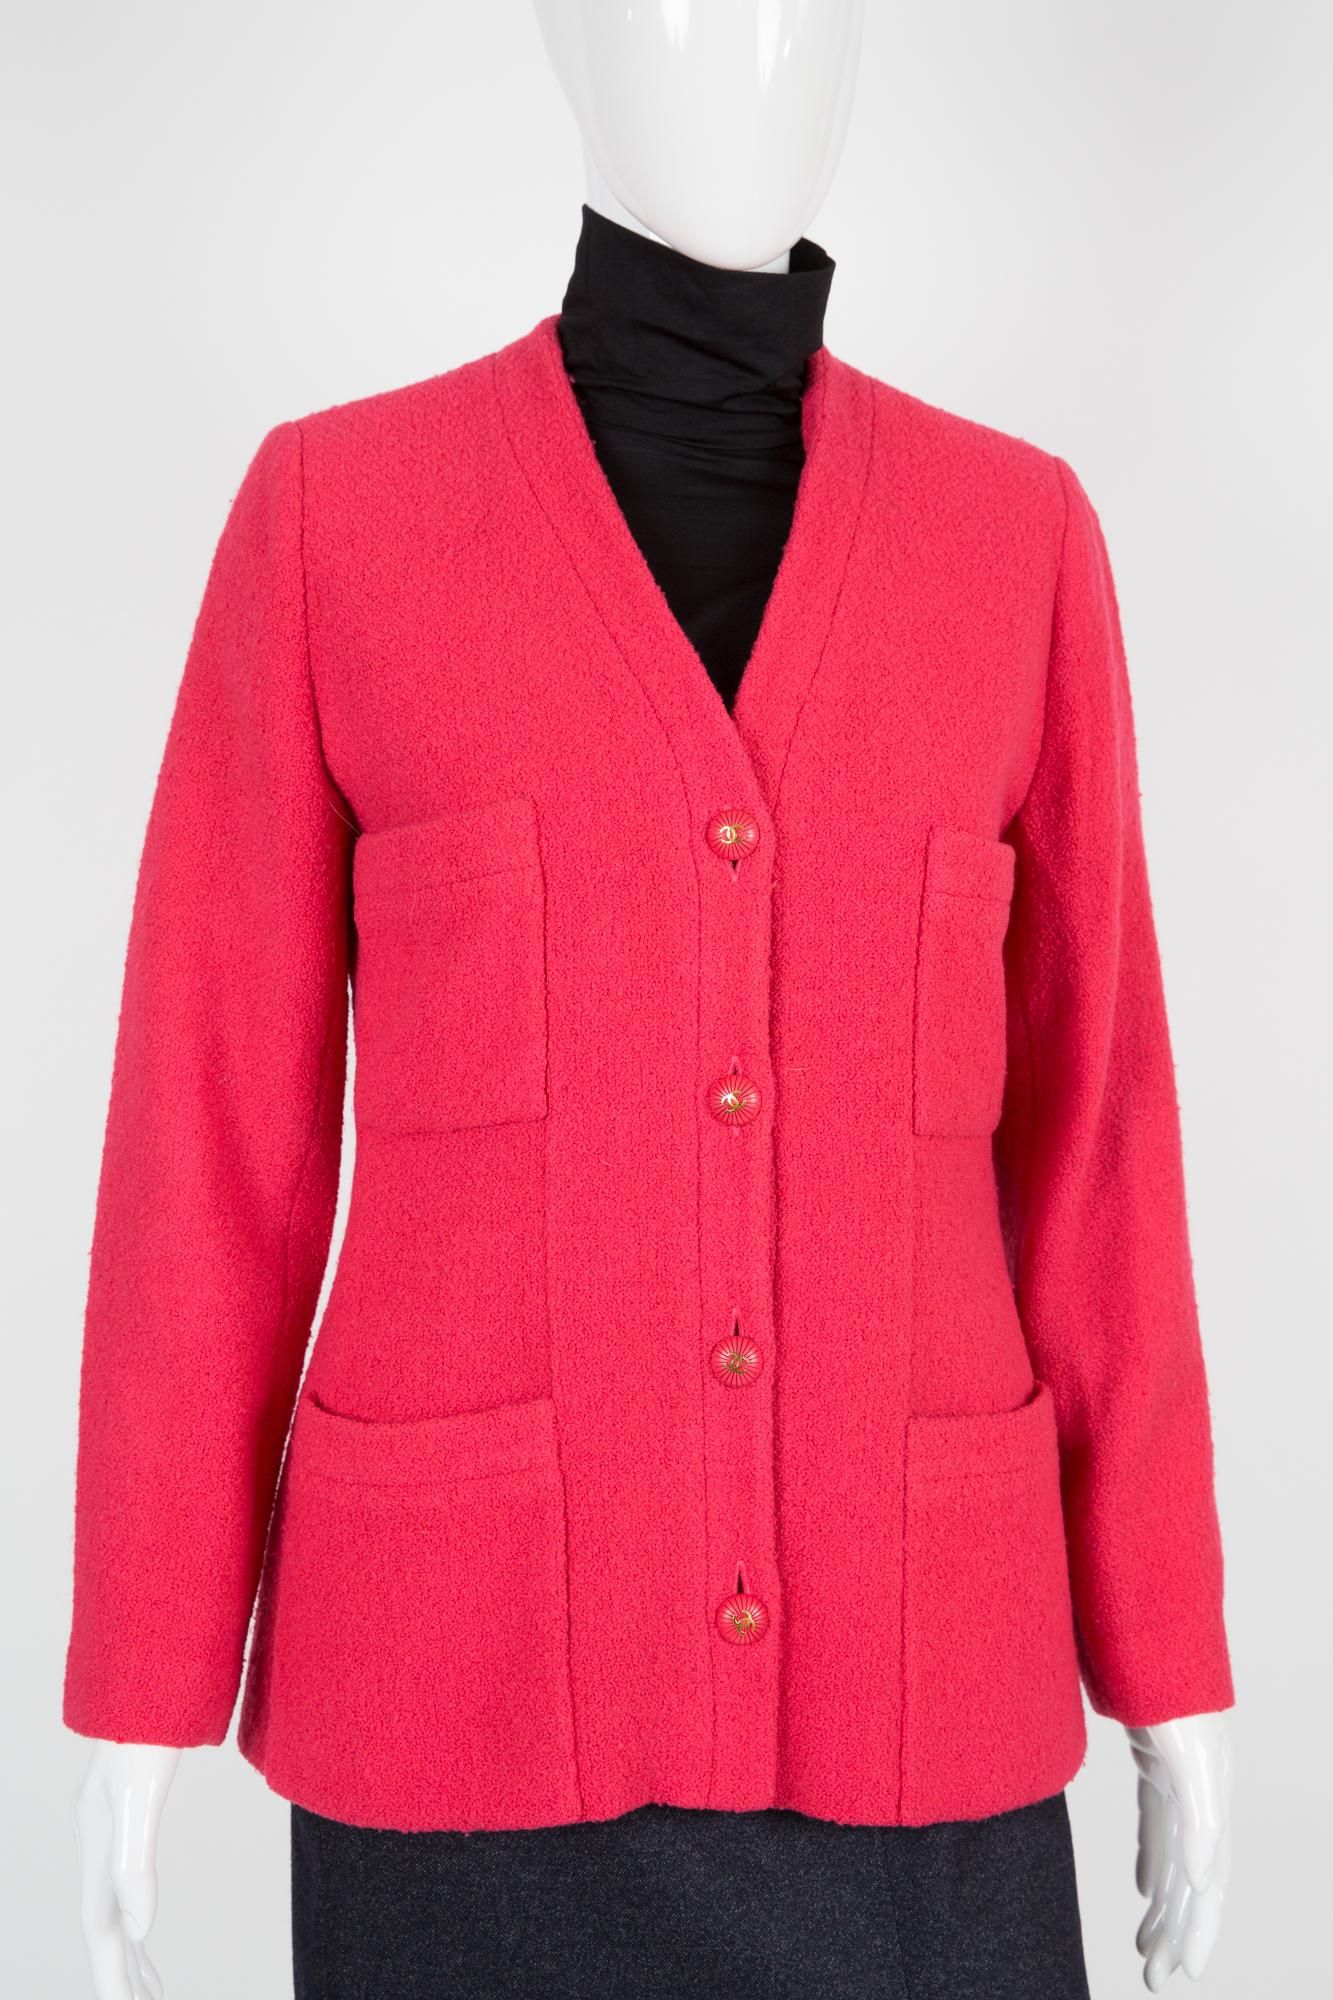 Chanel strawberry pink wool boucle tweed jacket featuring a V-neck buttoned, logo-embossed buttons, buttoned cuffs, multiple patch pockets, a silk lining and a straight hem.
100% silk 
Chanel label size: 40fr/US8/UK12
In excellent vintage condition.